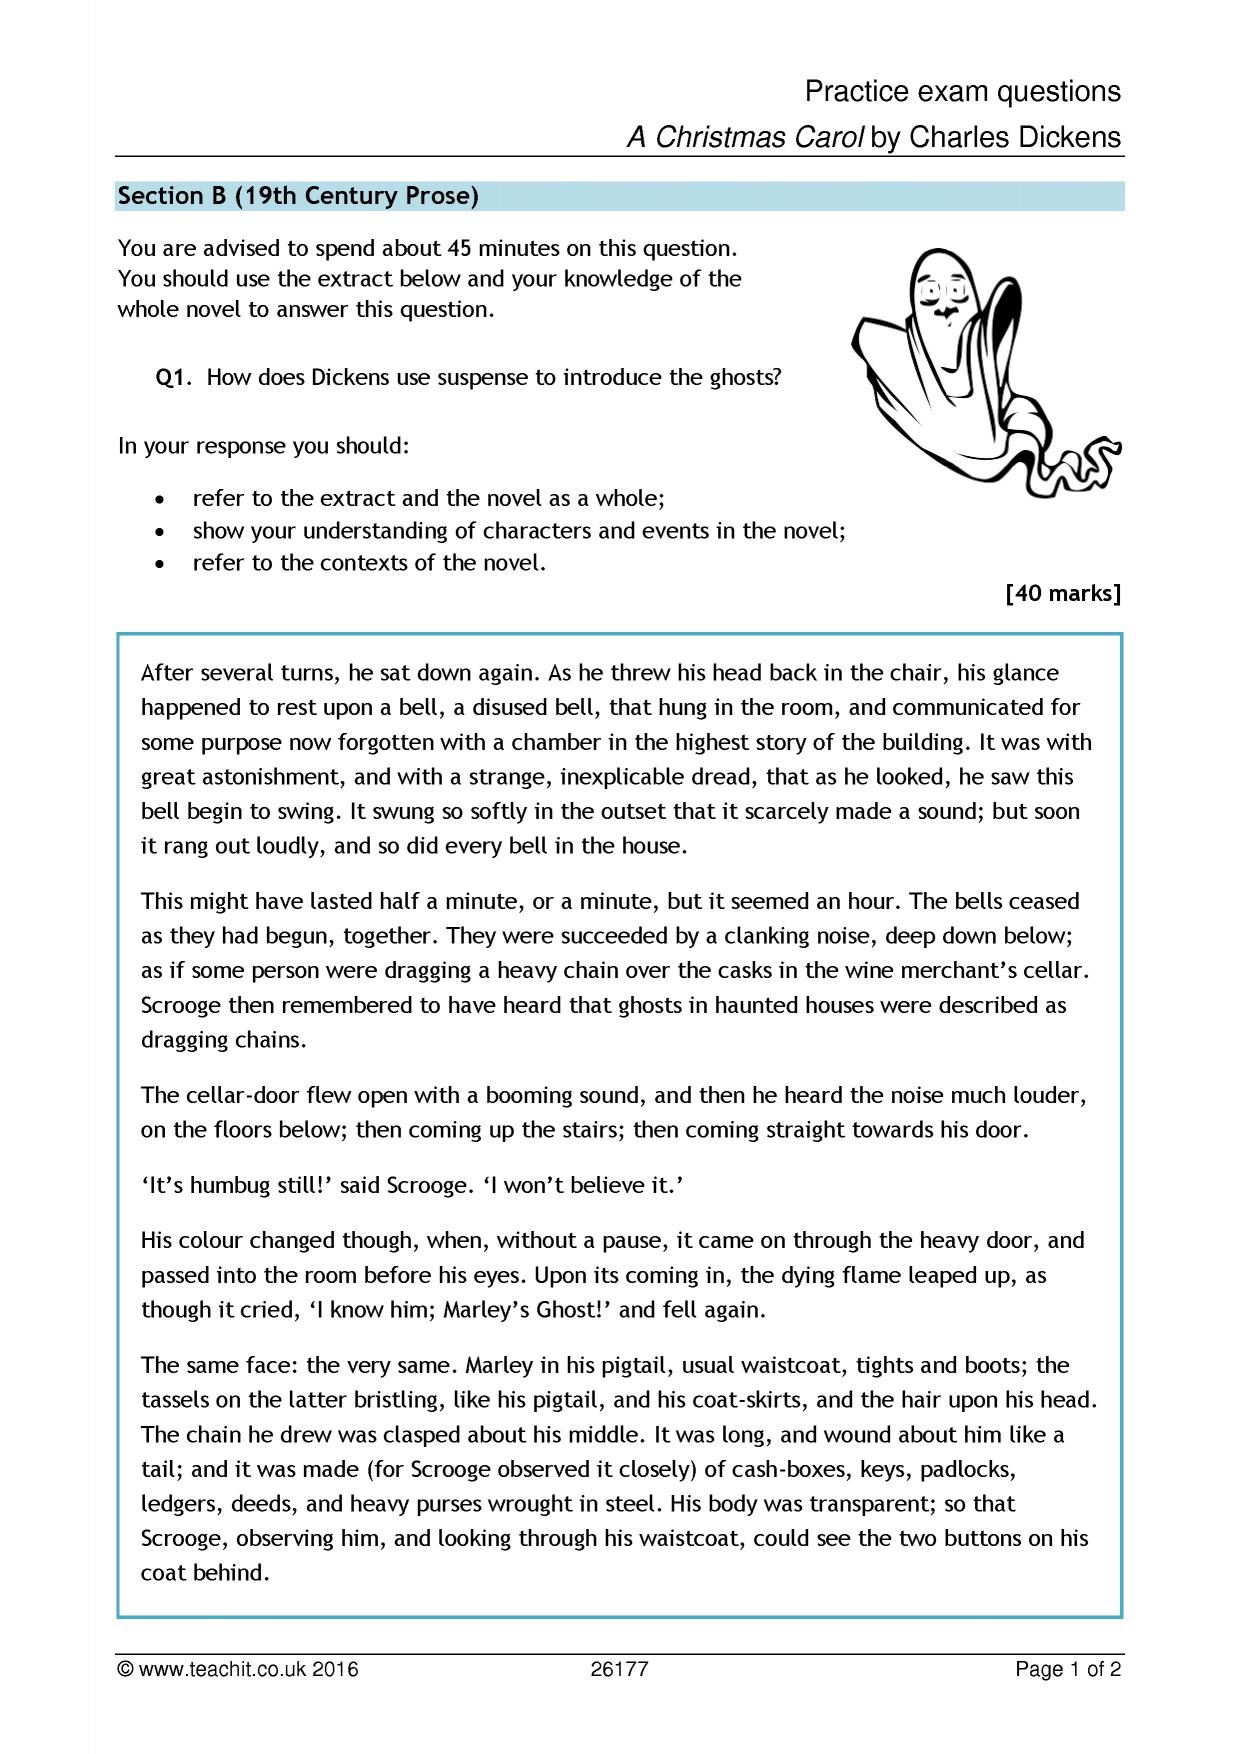 A Christmas Carol by Charles Dickens | KS3 resources (all)